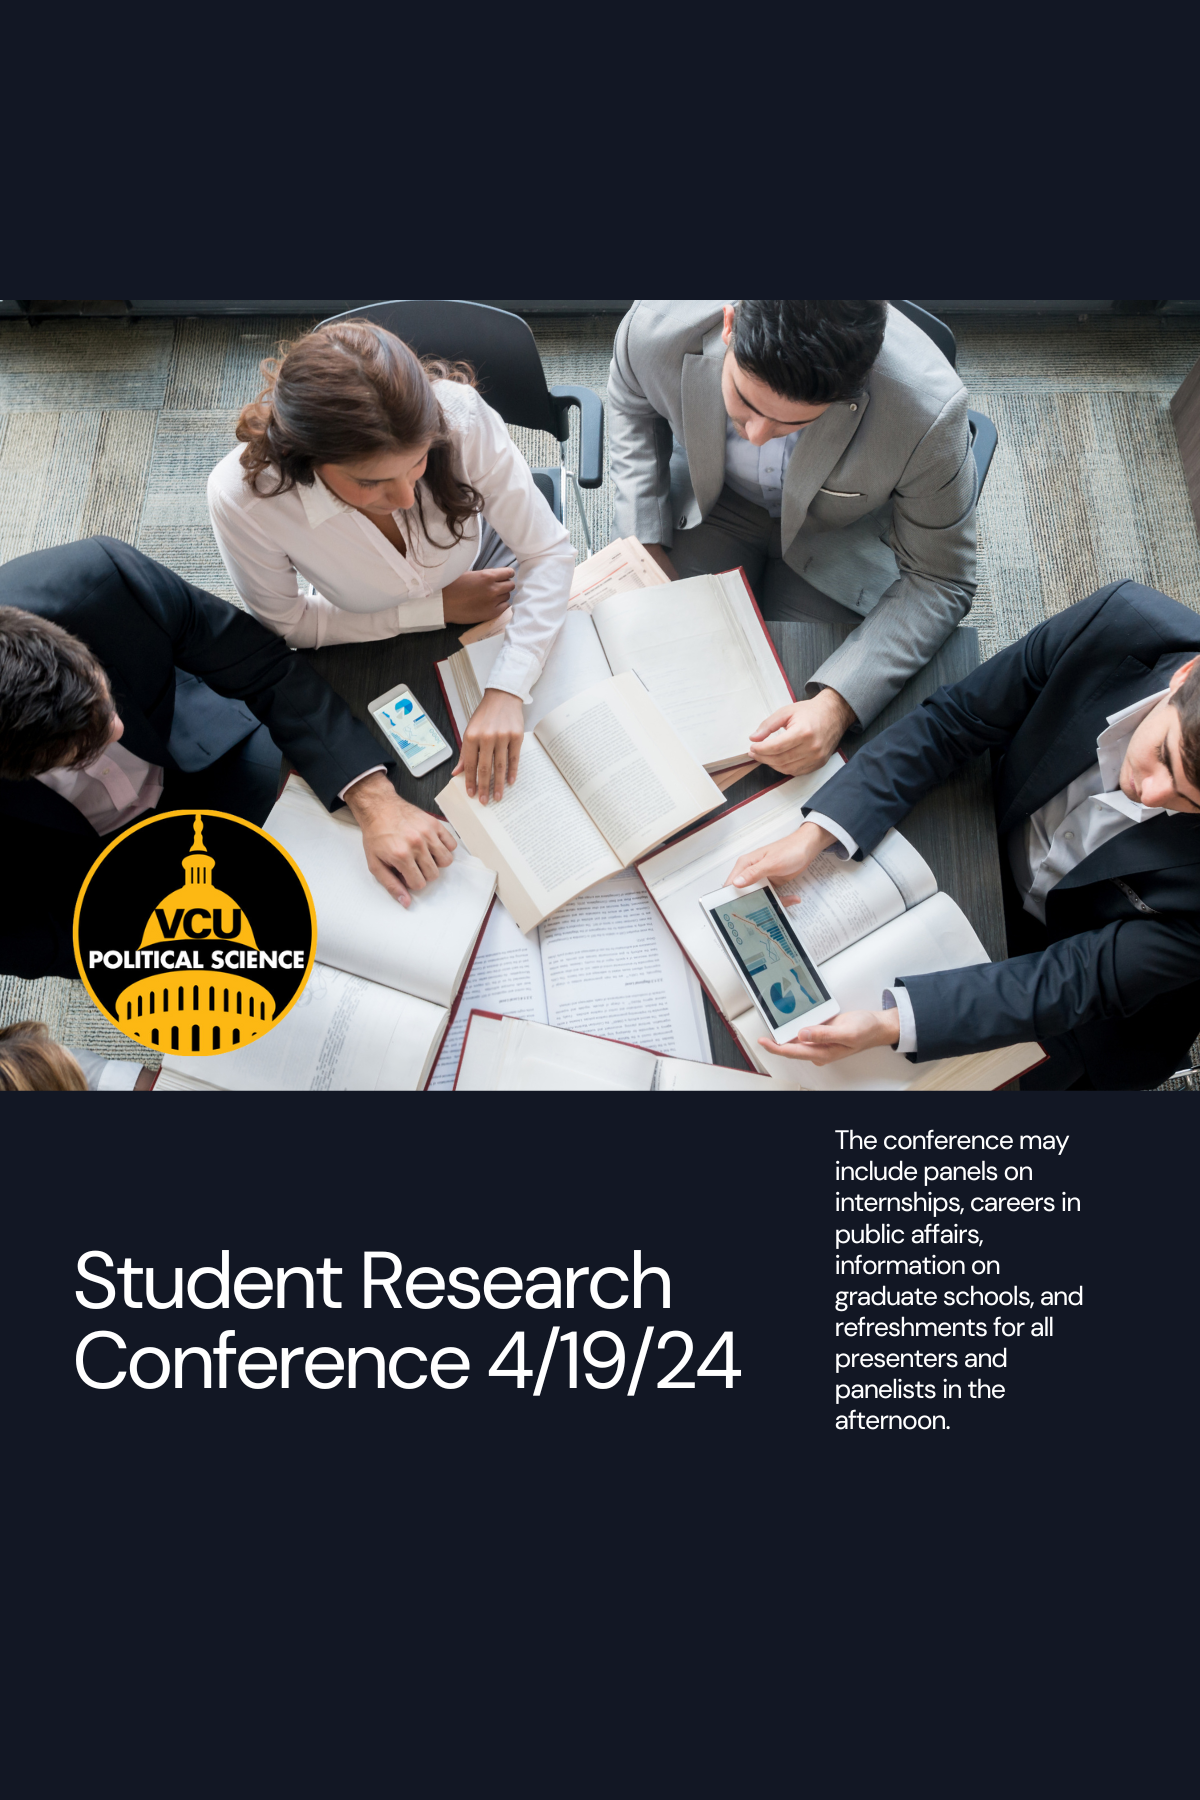 Student Research Conference: stock image of students working at a table